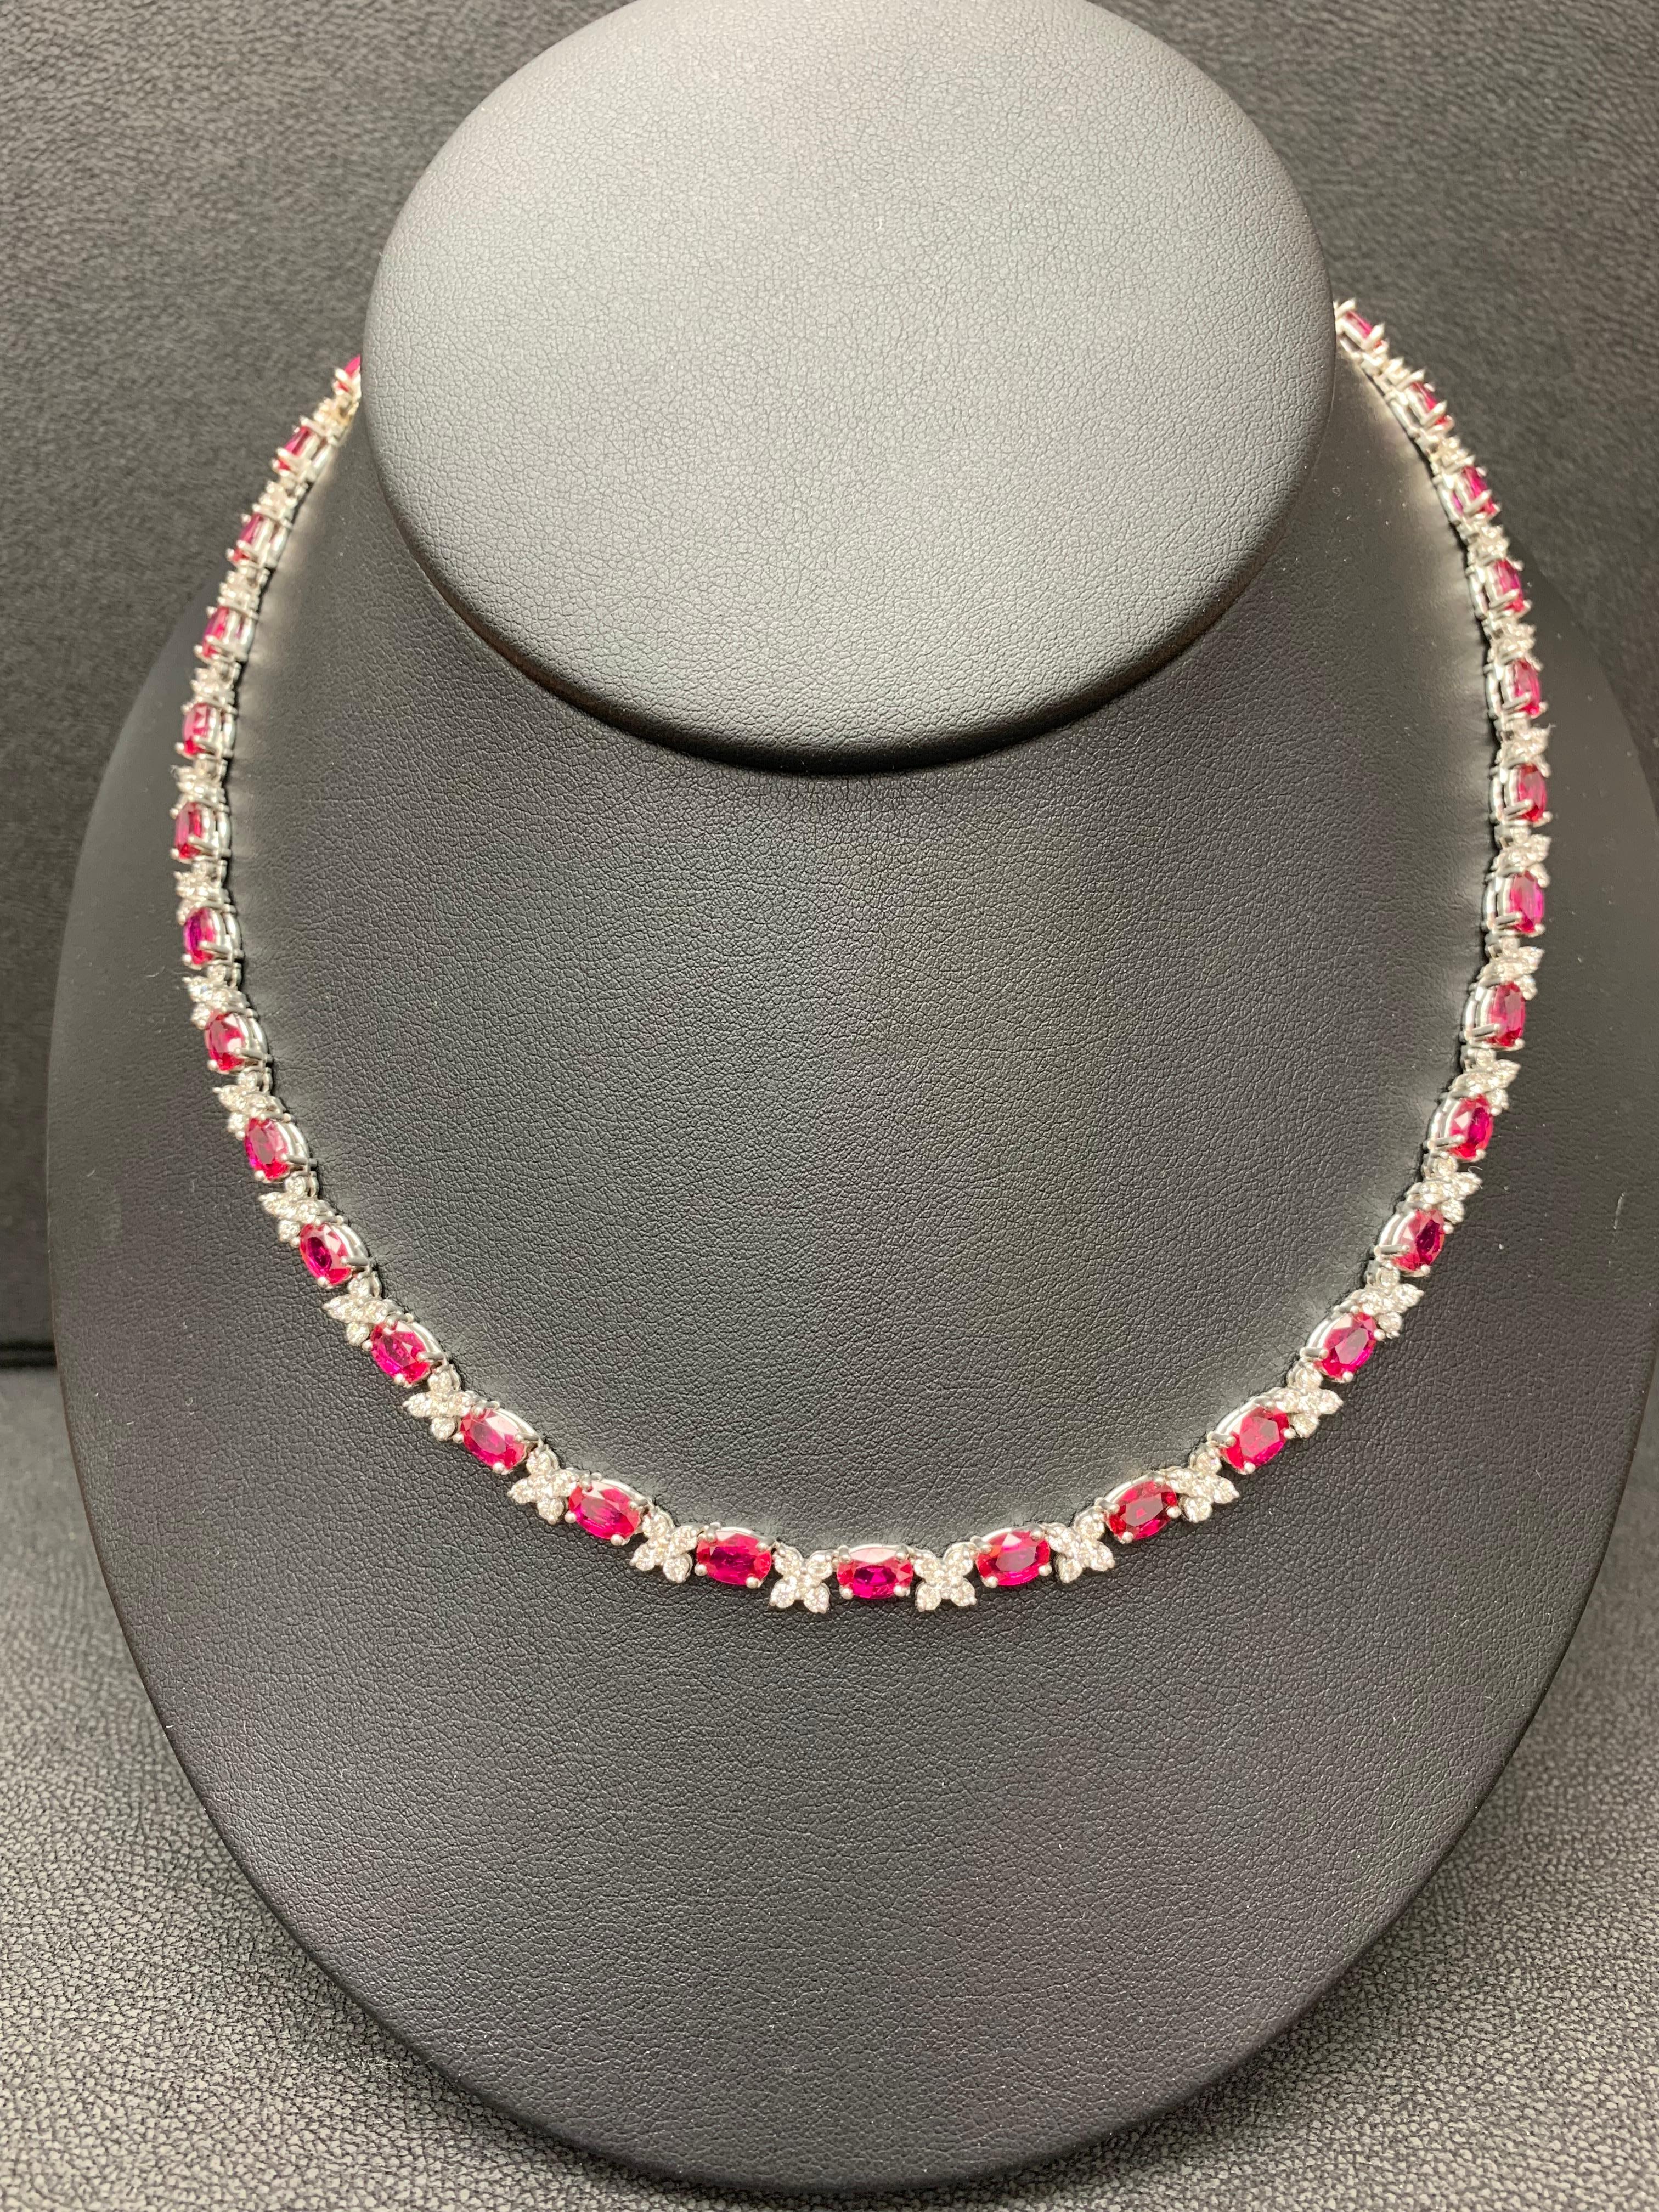 An incredibly color-rich tennis necklace showcasing 17.68 carats total of 39 oval cut red rubies, each elegantly spaced by 149 round brilliant diamonds in flower shape setting weighing 4.90 carats total. Made in 14k white gold. Approximately 16